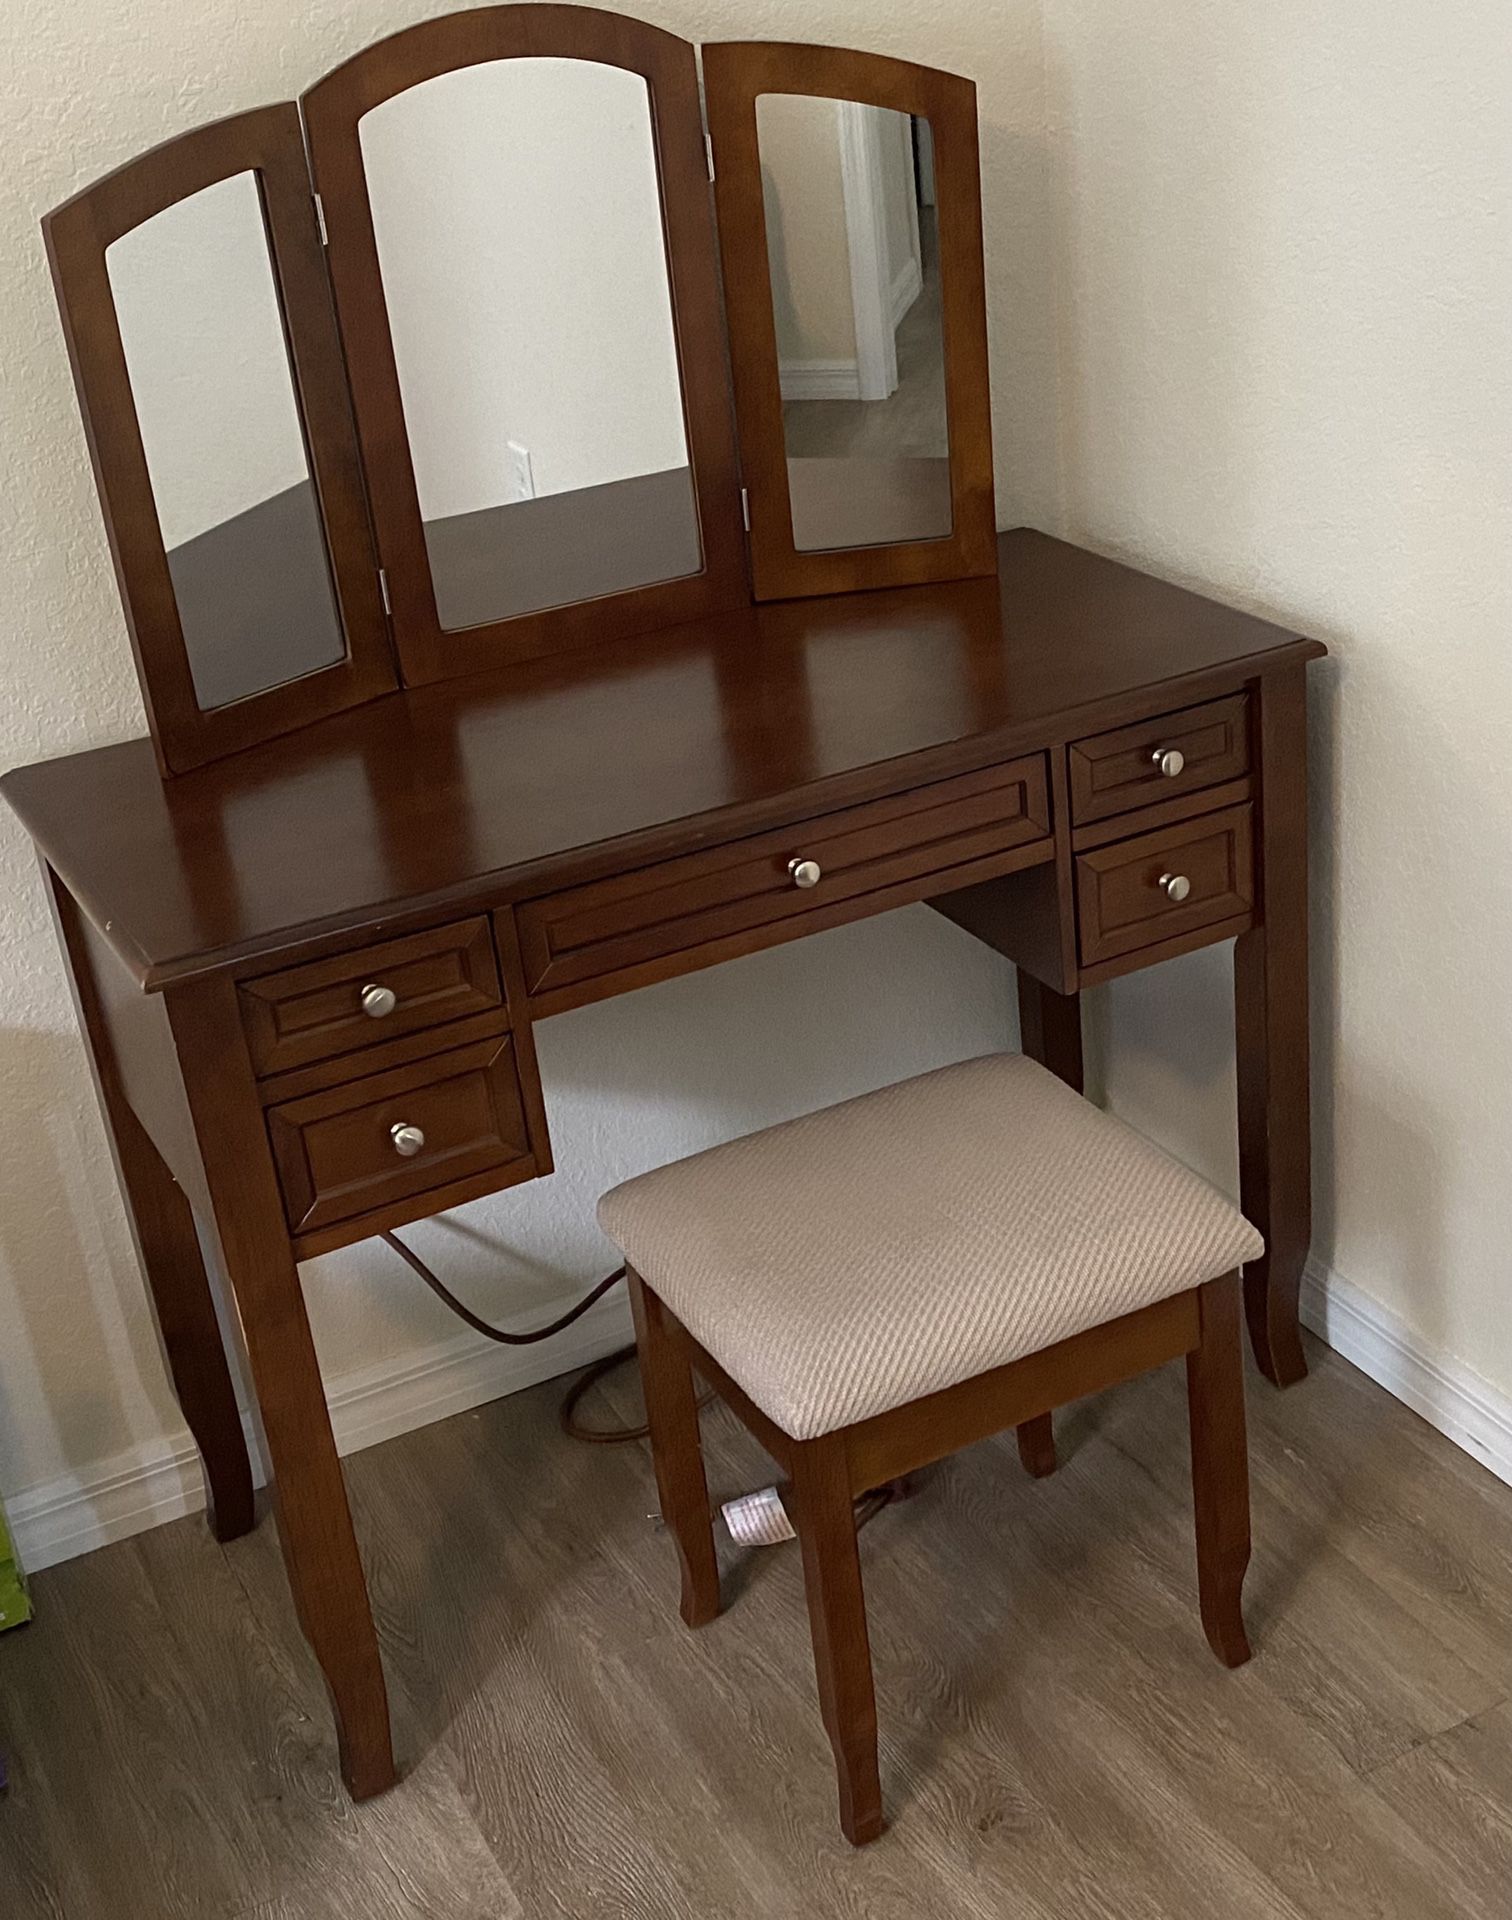 Vanity Table And Mirror With USB And Power Outlet